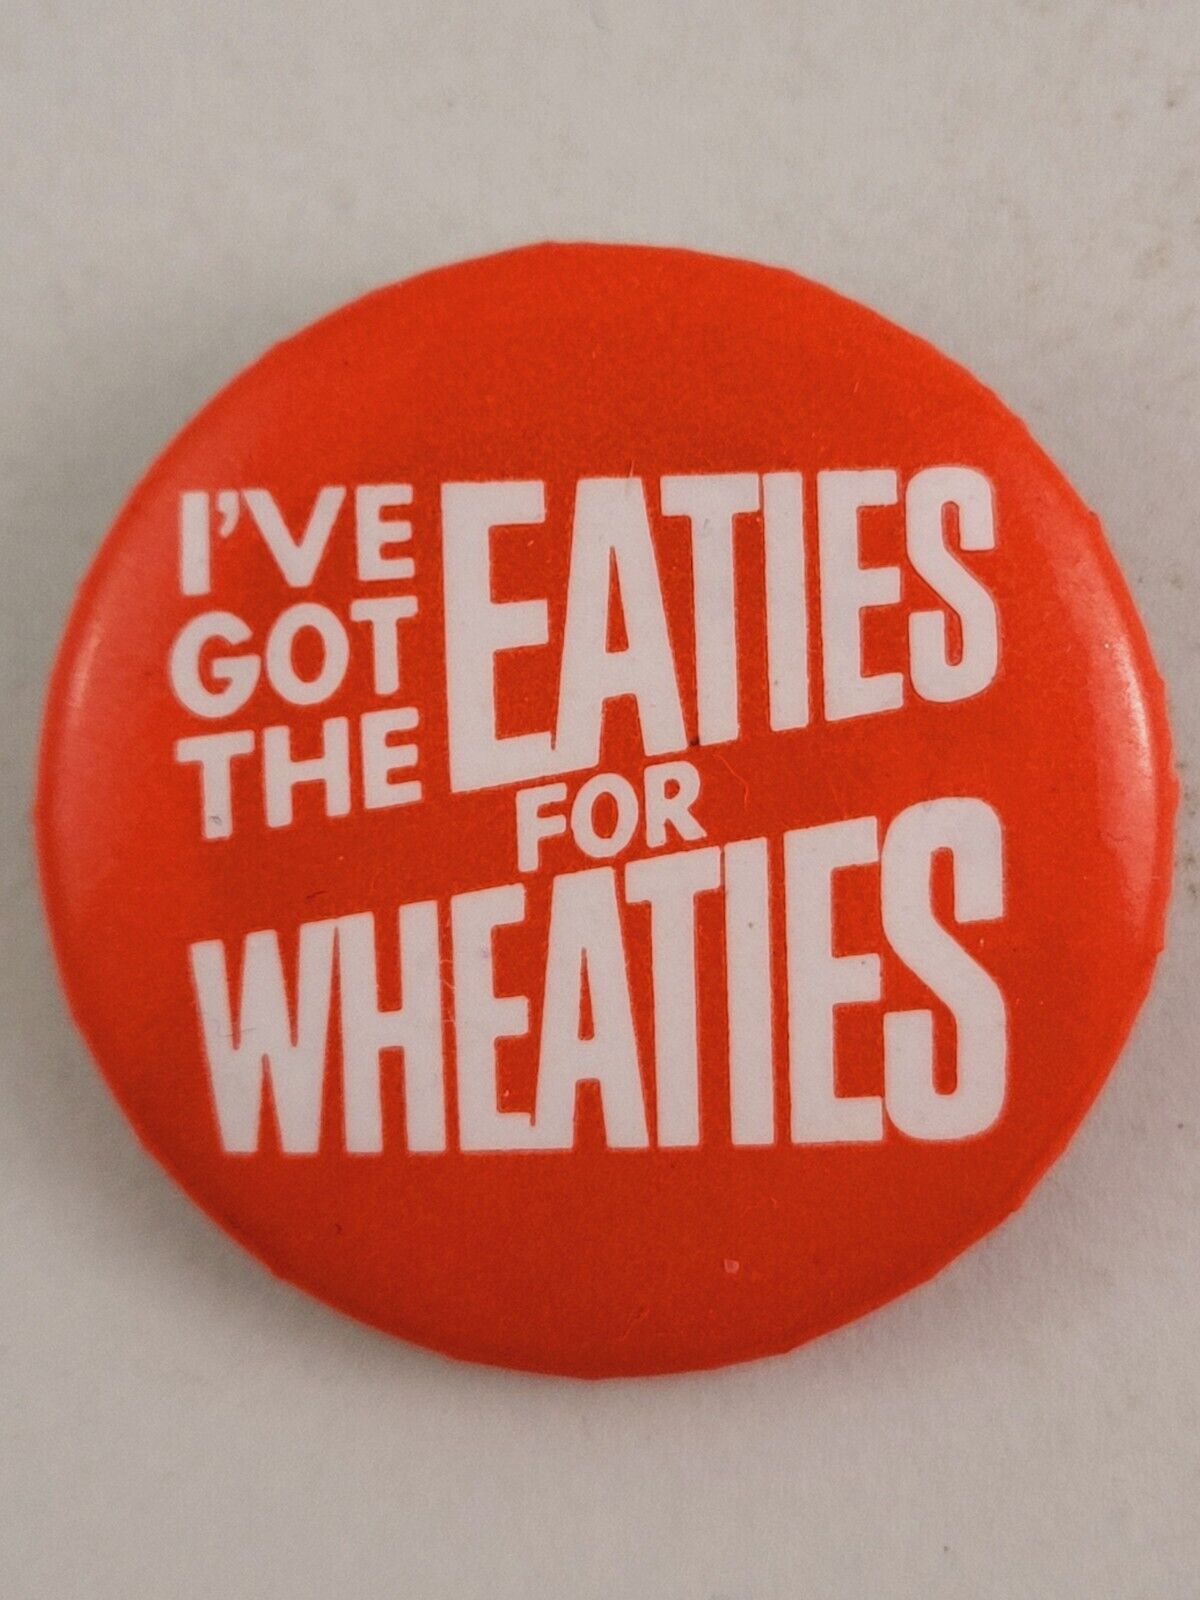 I\'ve Got The Eaties For Wheaties Vintage Pinback Button